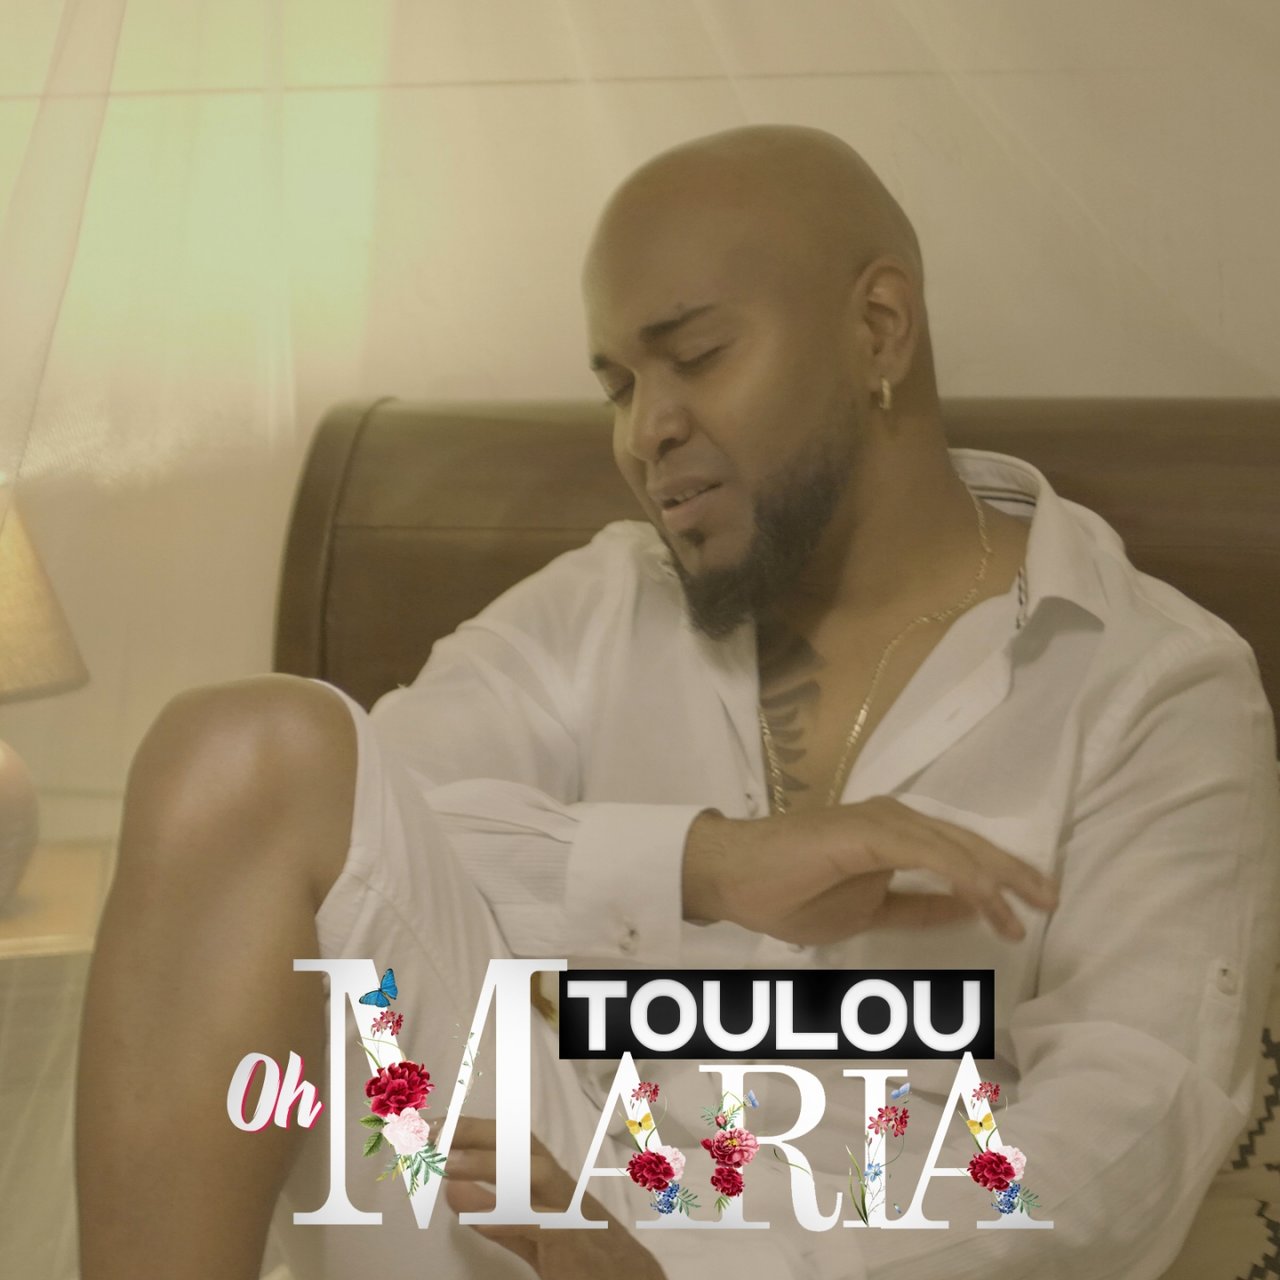 Toulou - Oh Maria (Cover)